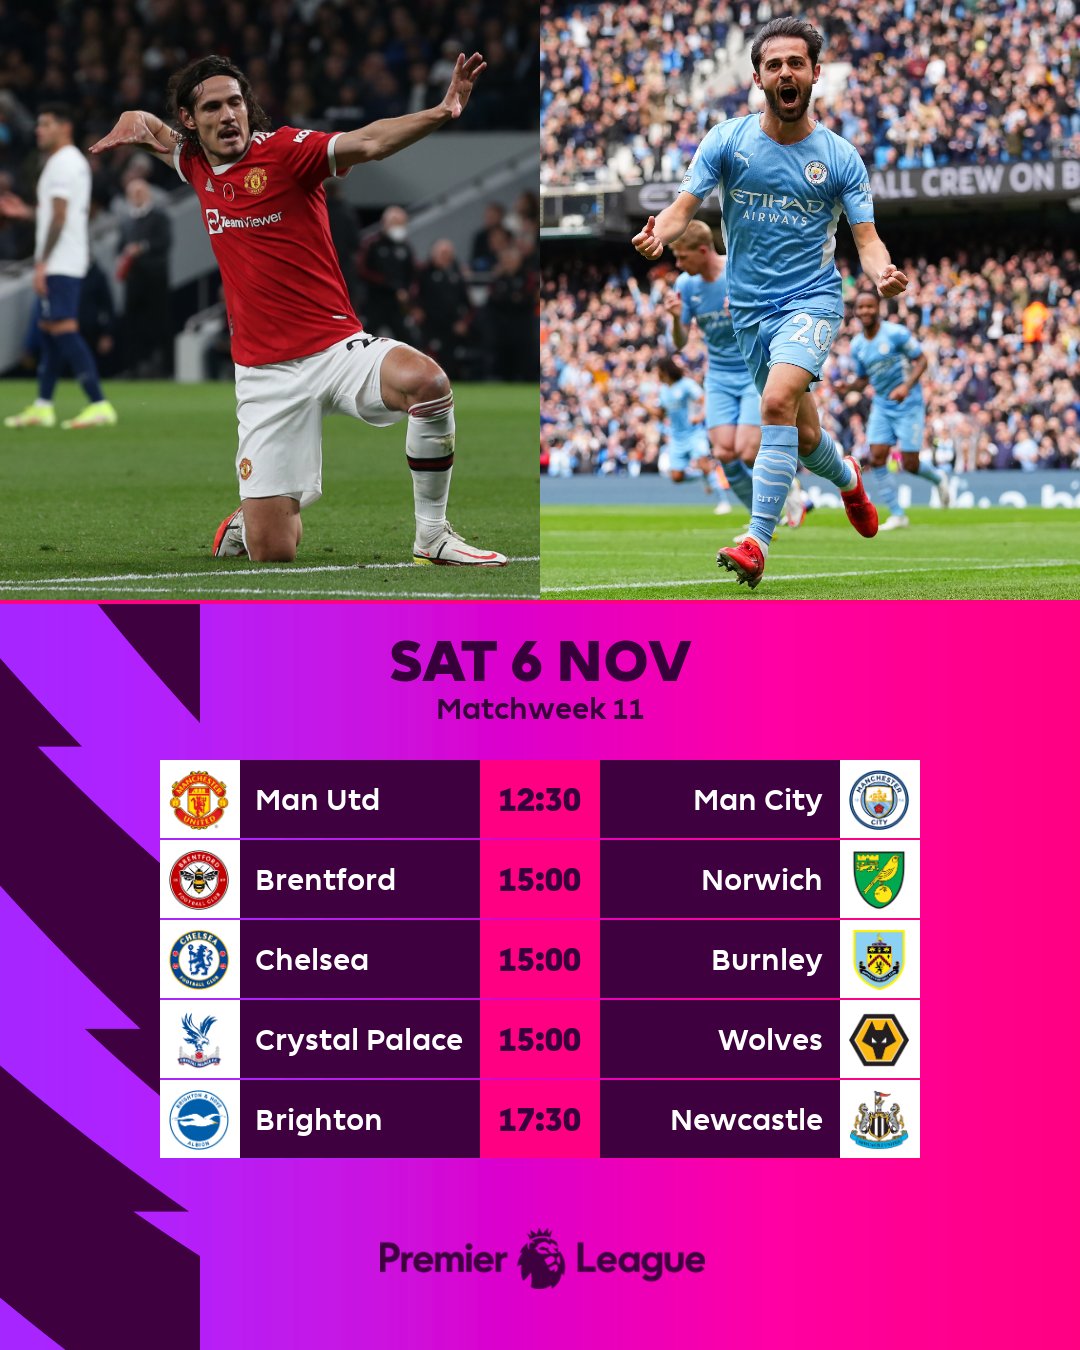 ⚽ 2021/2022 Premier League Matchweek 11- Previews, Stats, Results and Live Updates Man United Vs Man City, Westham vs Liverpool, Chelsea vs Burnley, Arsenal, Tottenham and More - Football